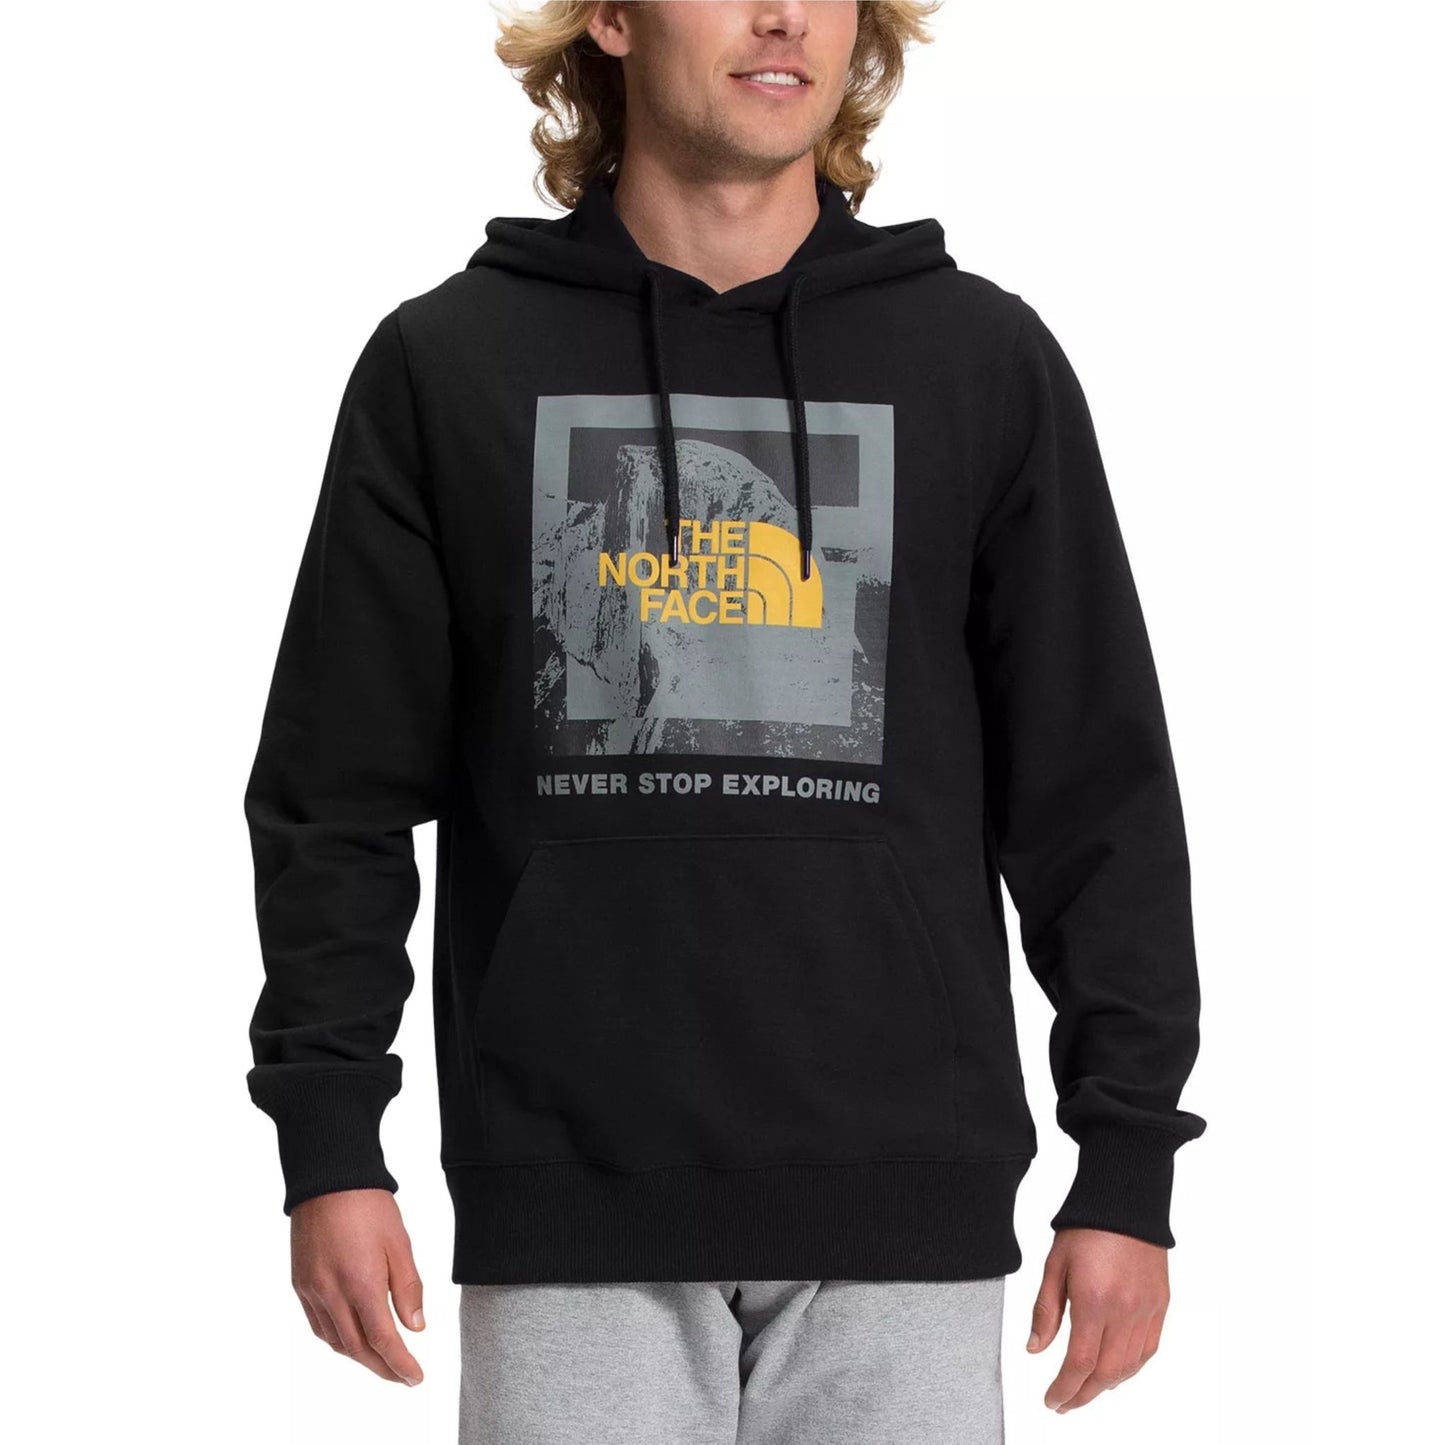 The North Face® Mens Climb Graphic Hoodie, Black